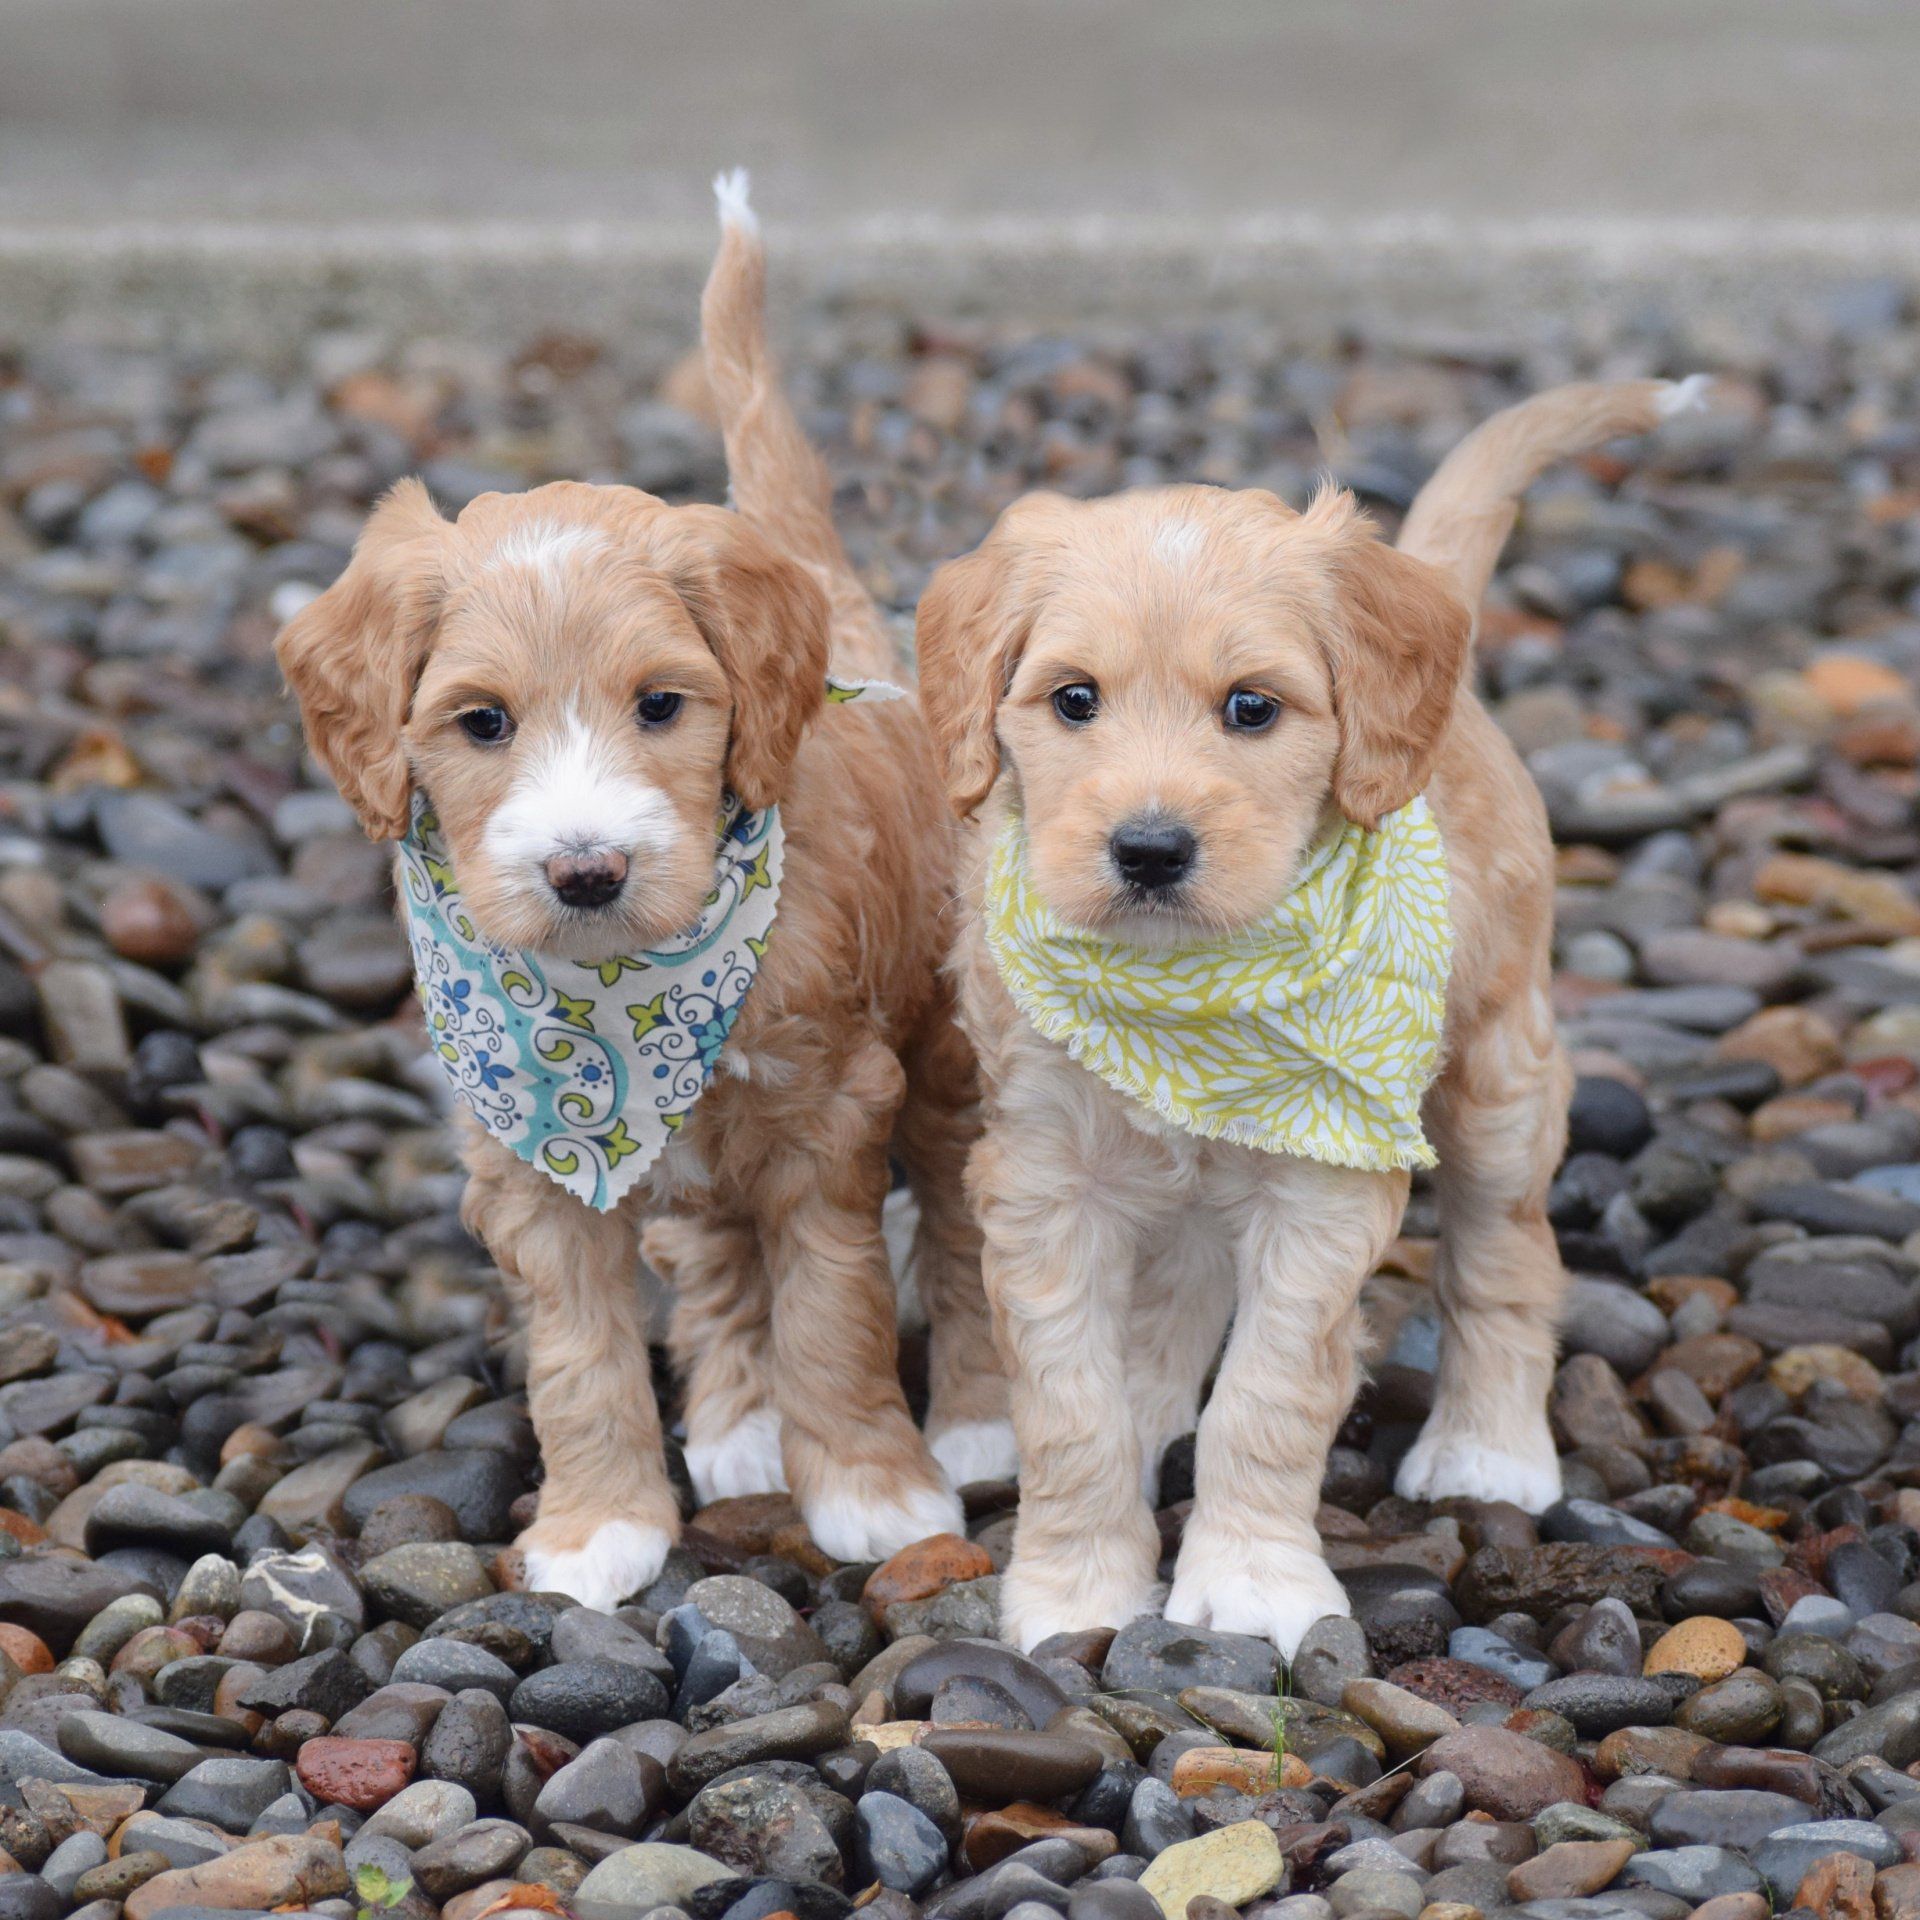 Two happy puppies standing on the rocks.